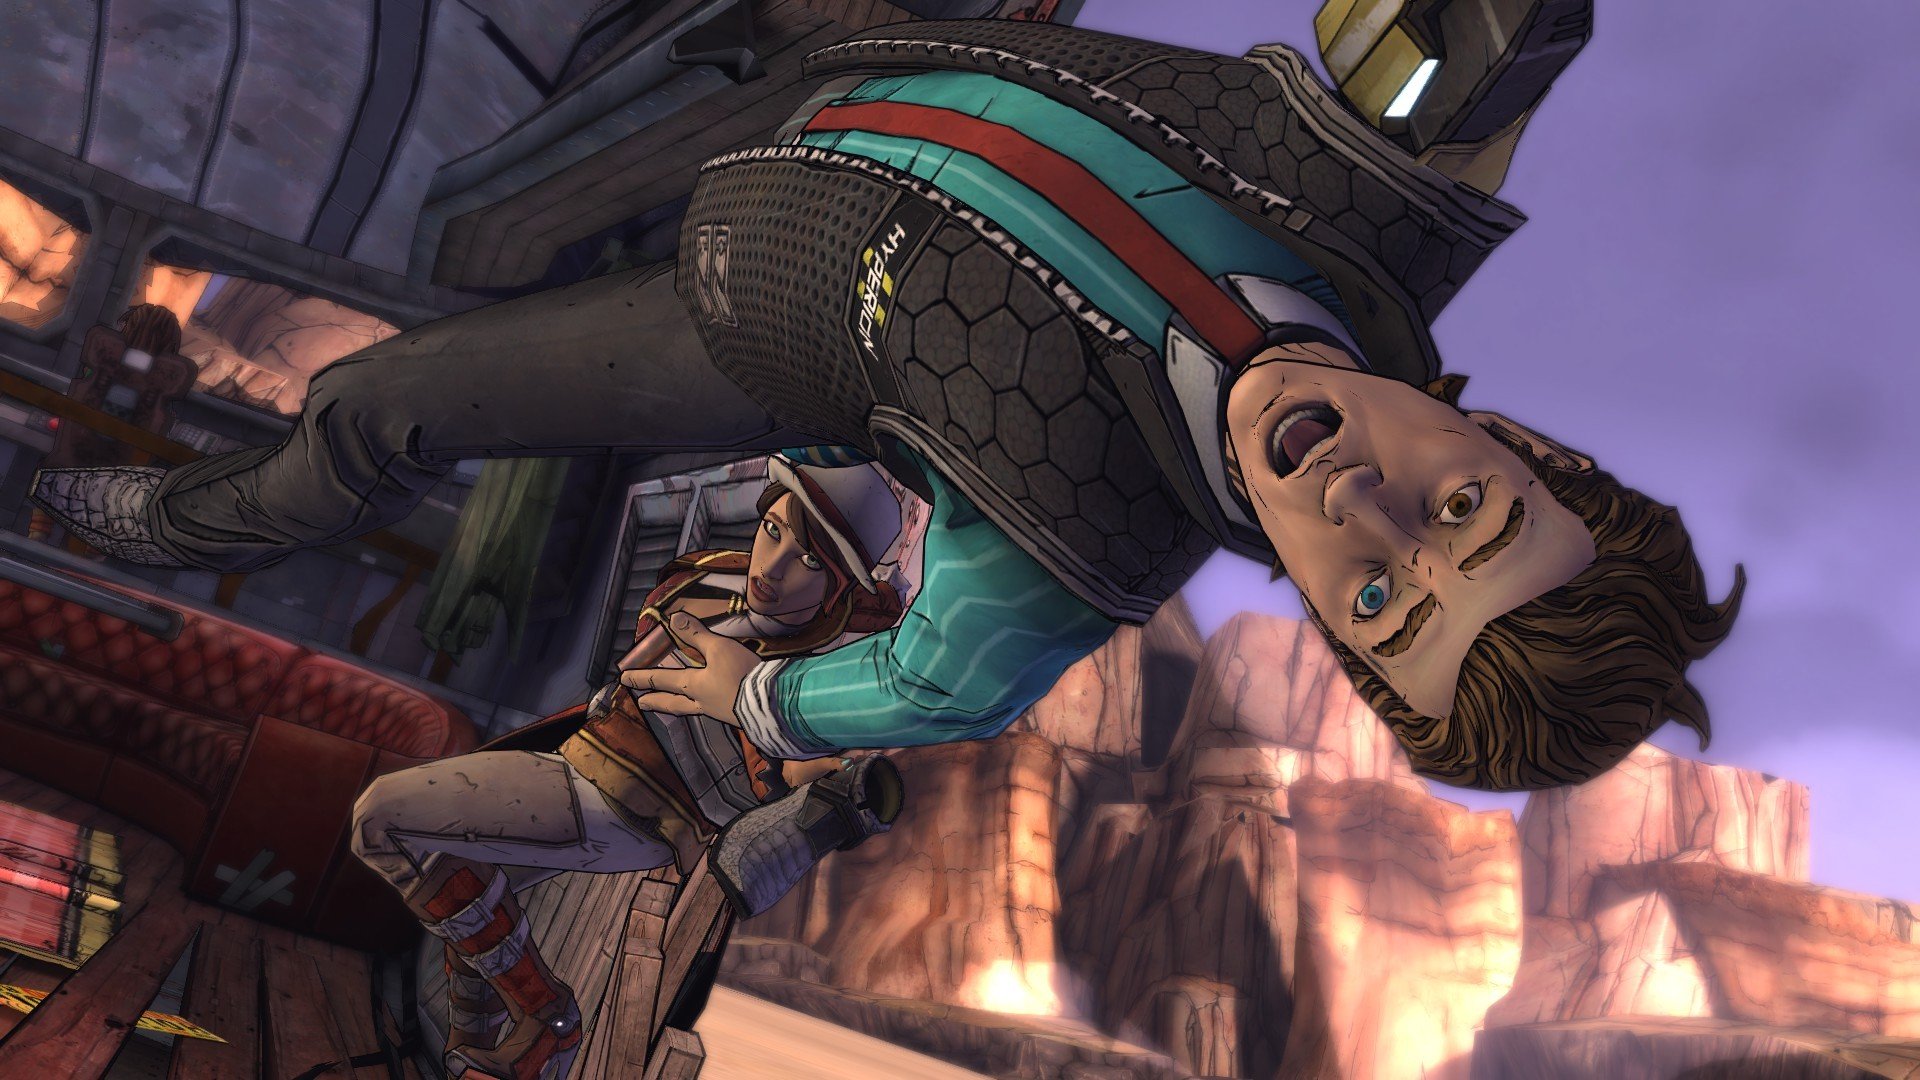 tales from the borderlands wallpaper,action adventure game,cg artwork,fictional character,adventure game,screenshot